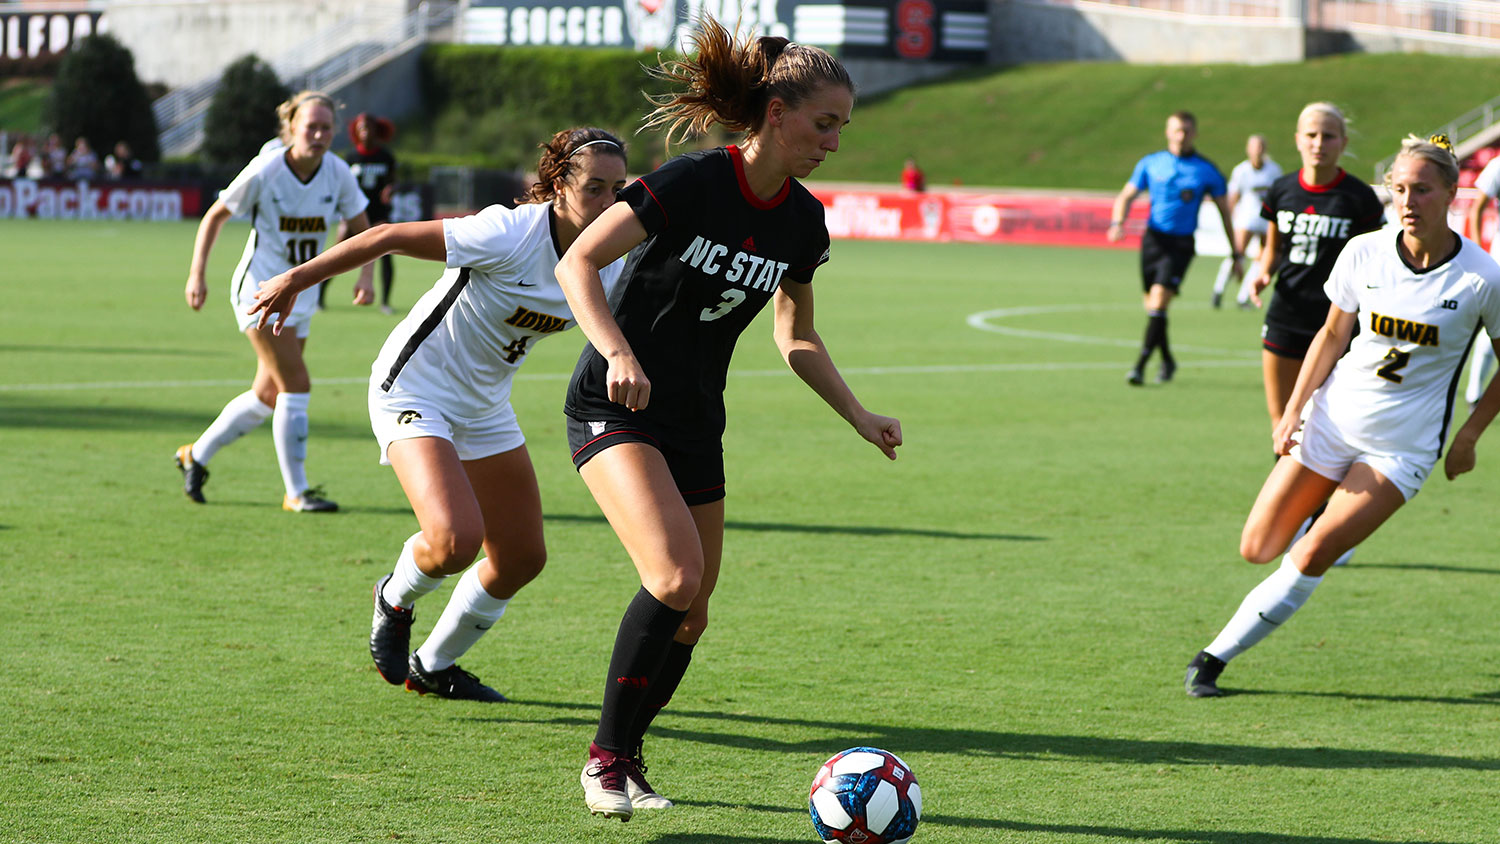 NC State women's soccer player Jaylynn Nash gets ready to kick the ball during a game